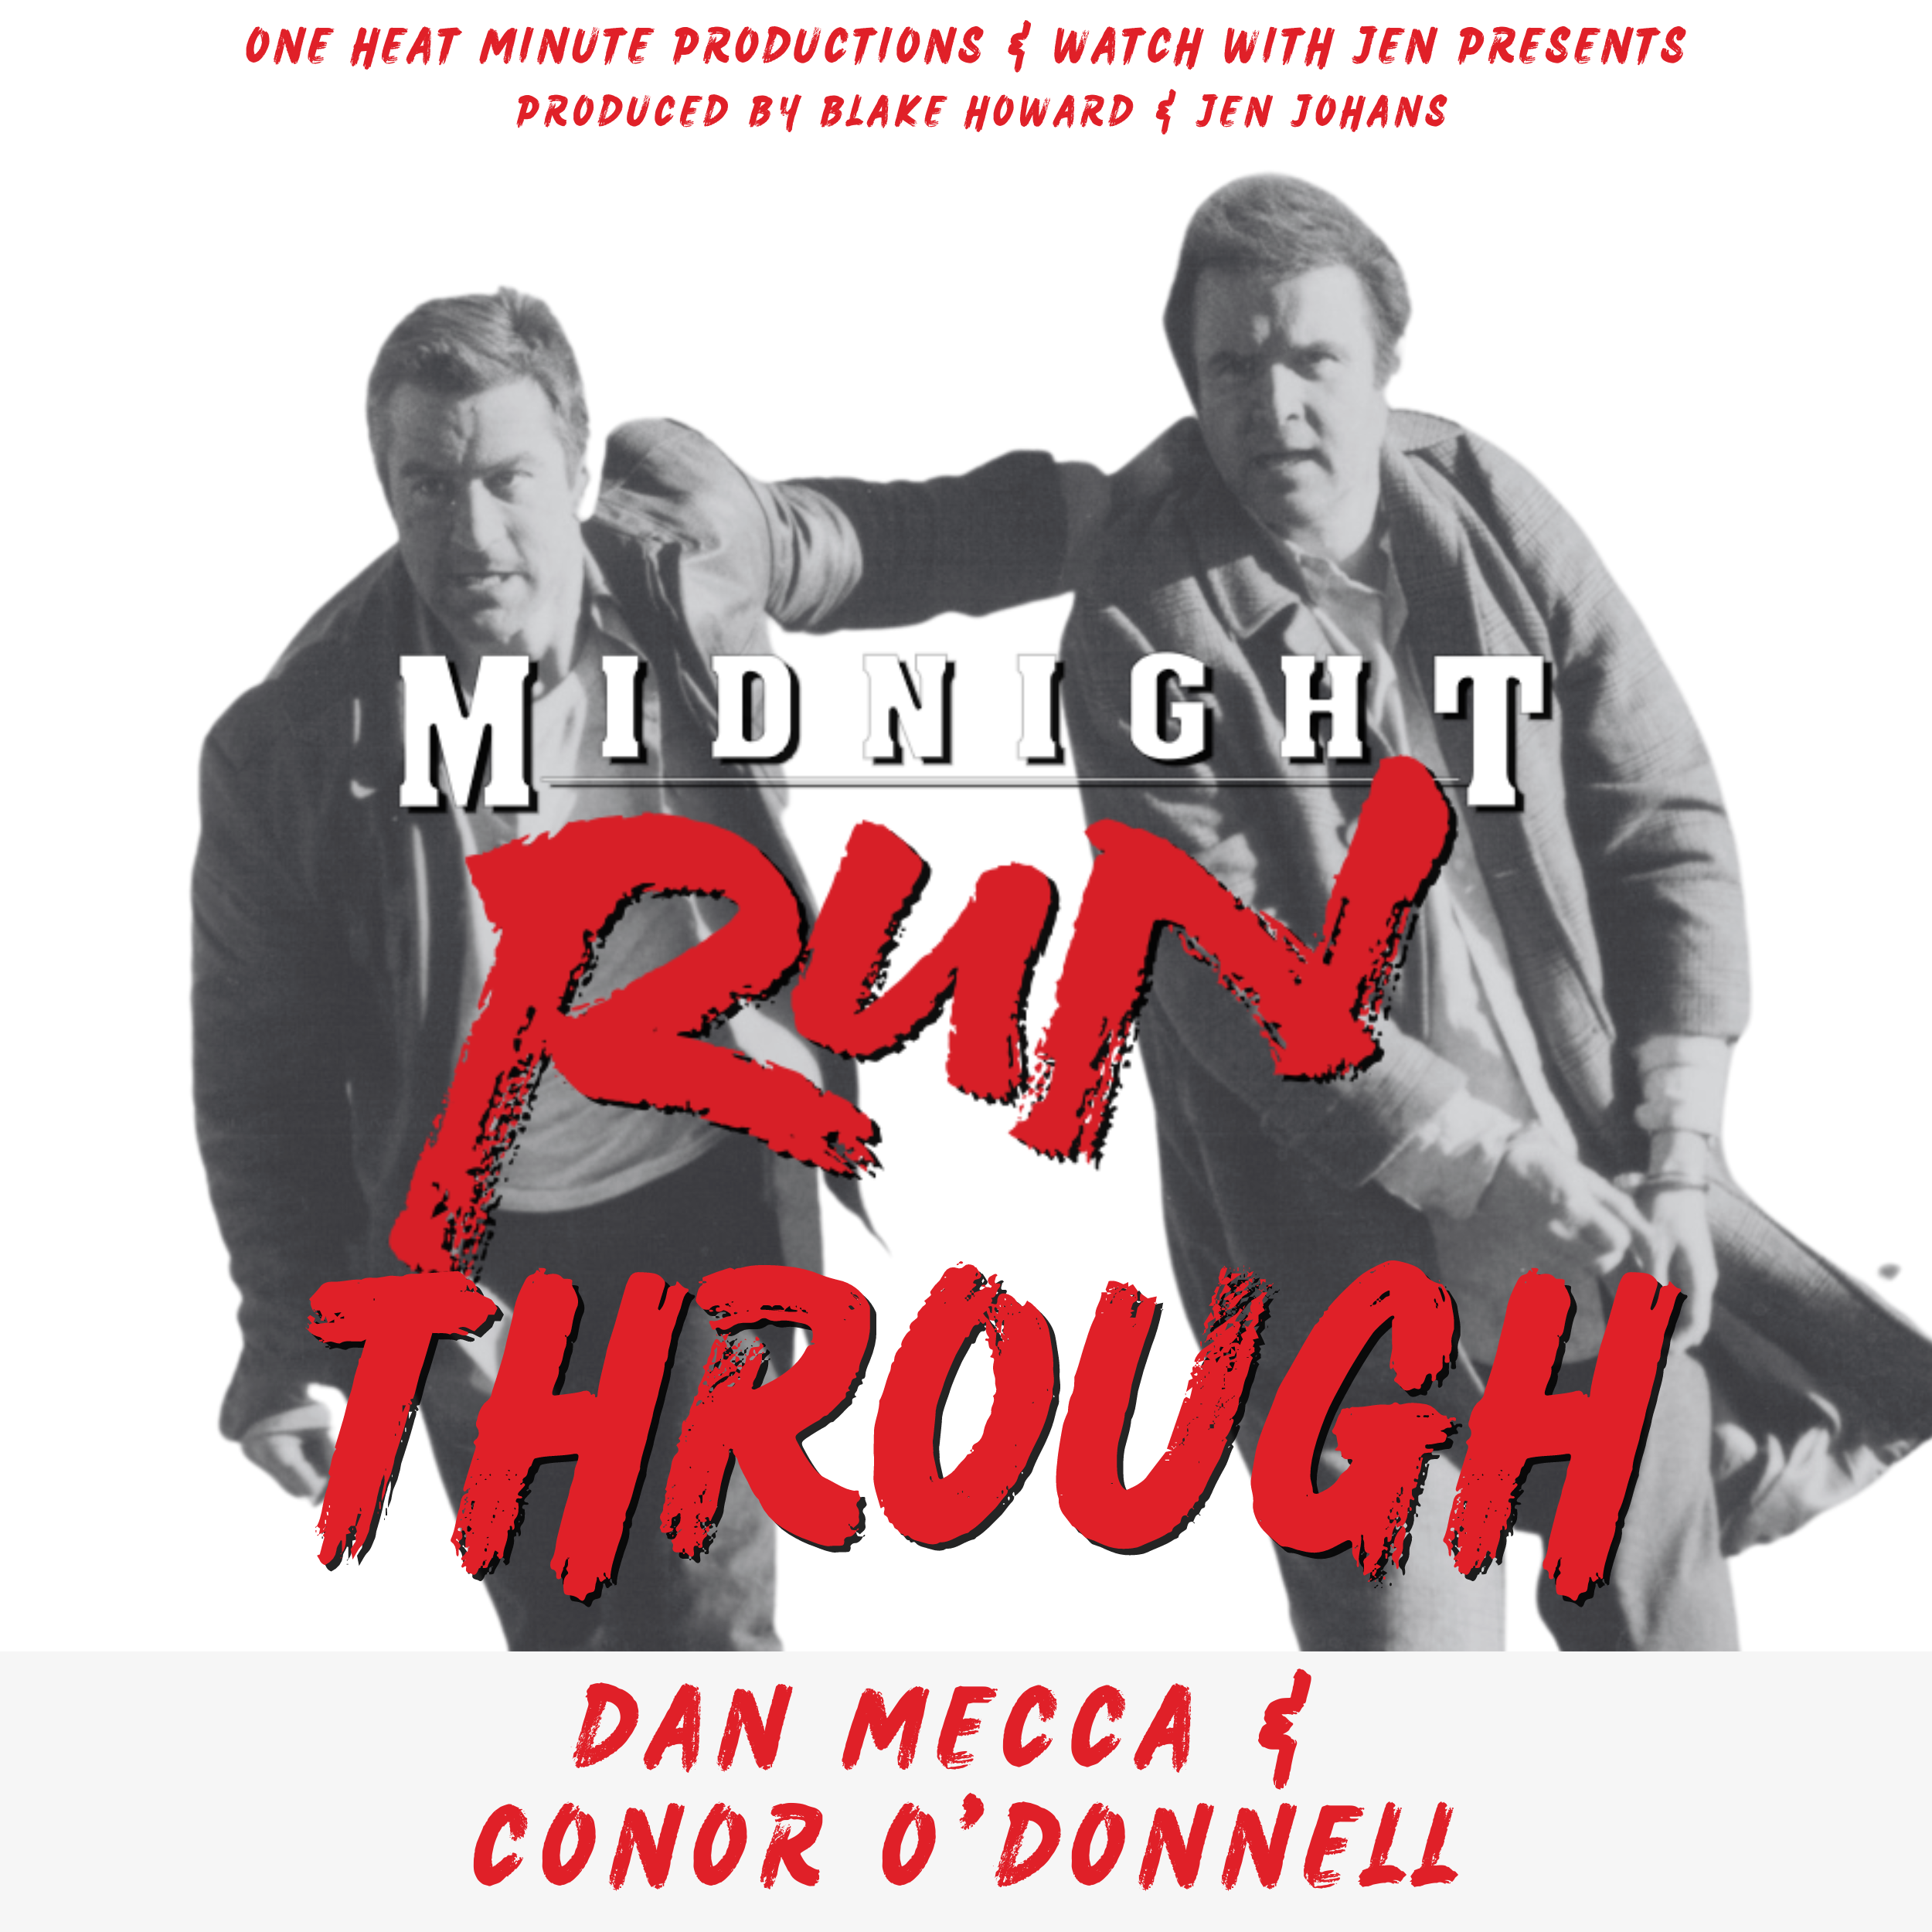 MIDNIGHT RUN-THROUGH - Episode 9 with Dan Mecca & Conor O'Donnell (From One Heat Minute Productions & Watch With Jen)